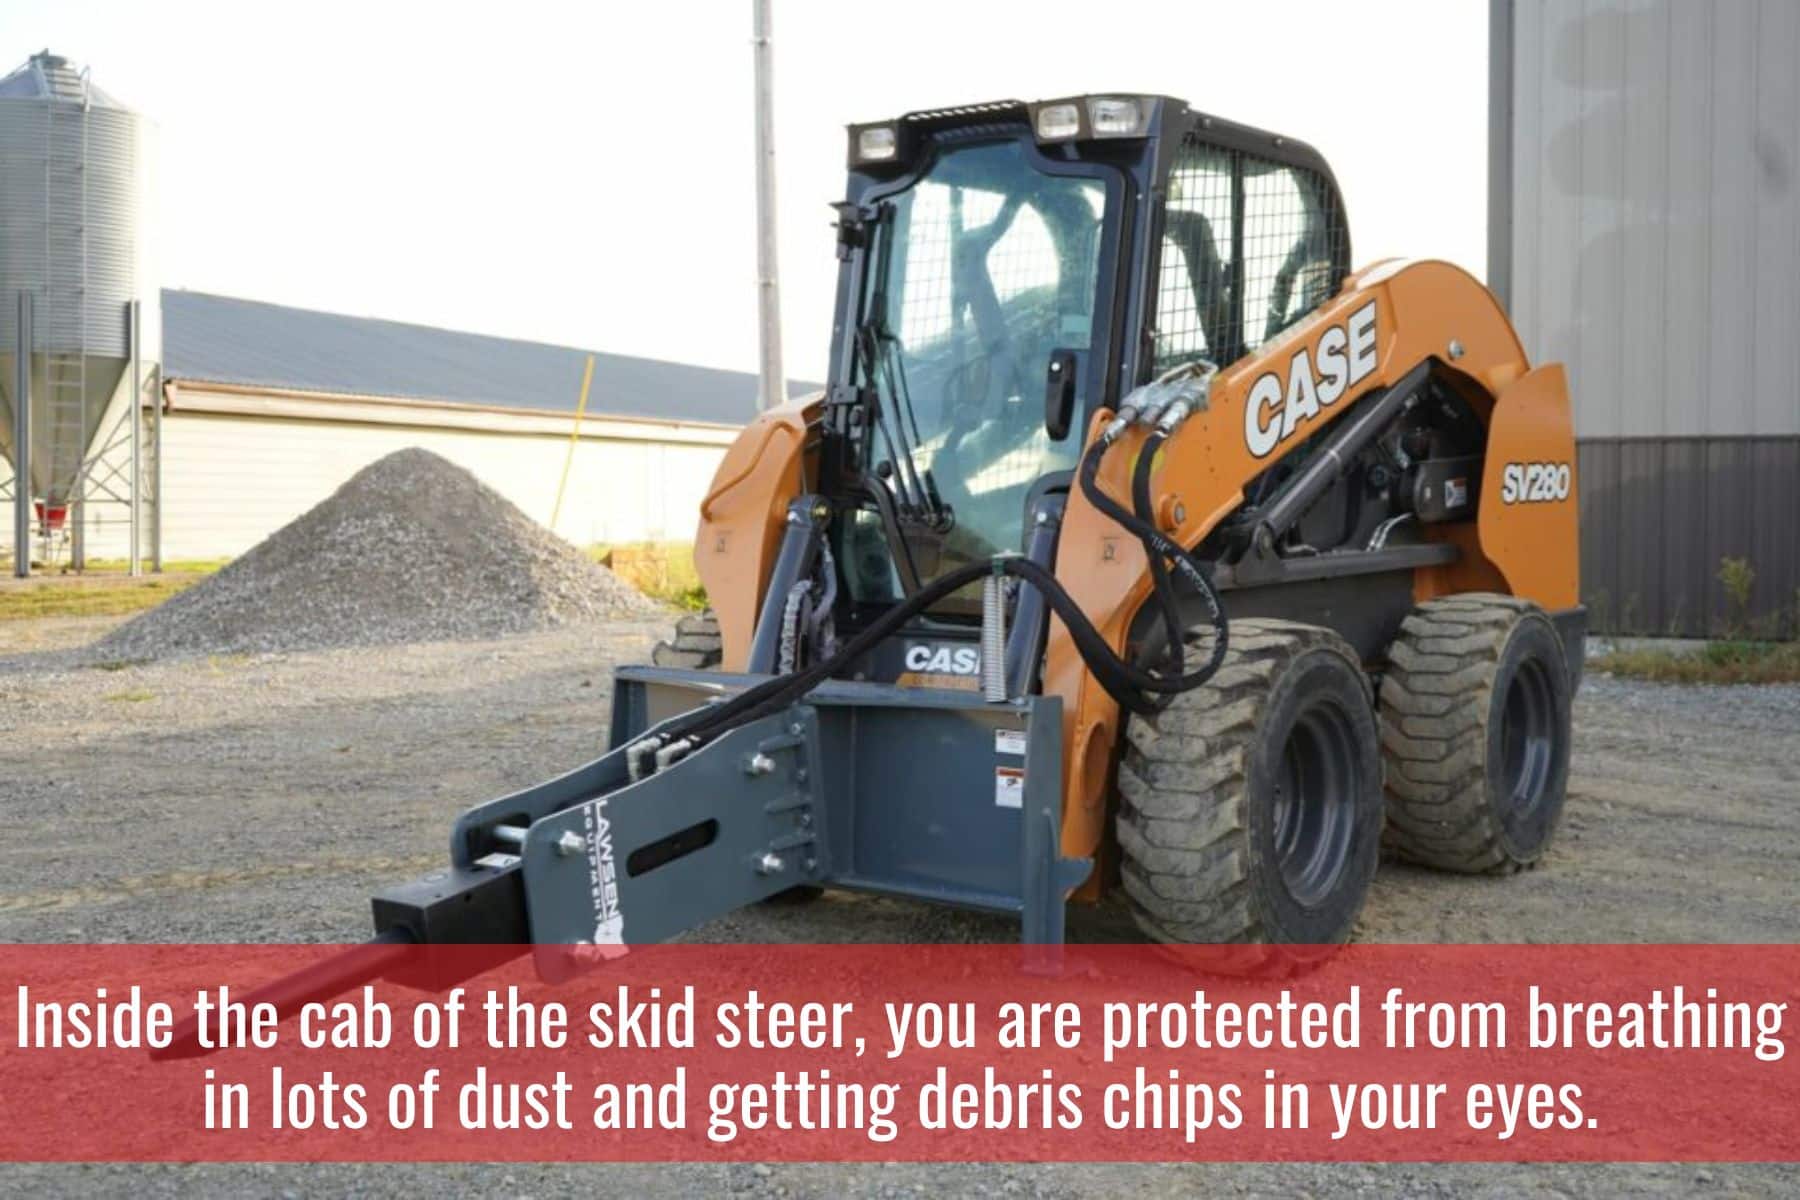 Skid steer cabs protect the driver